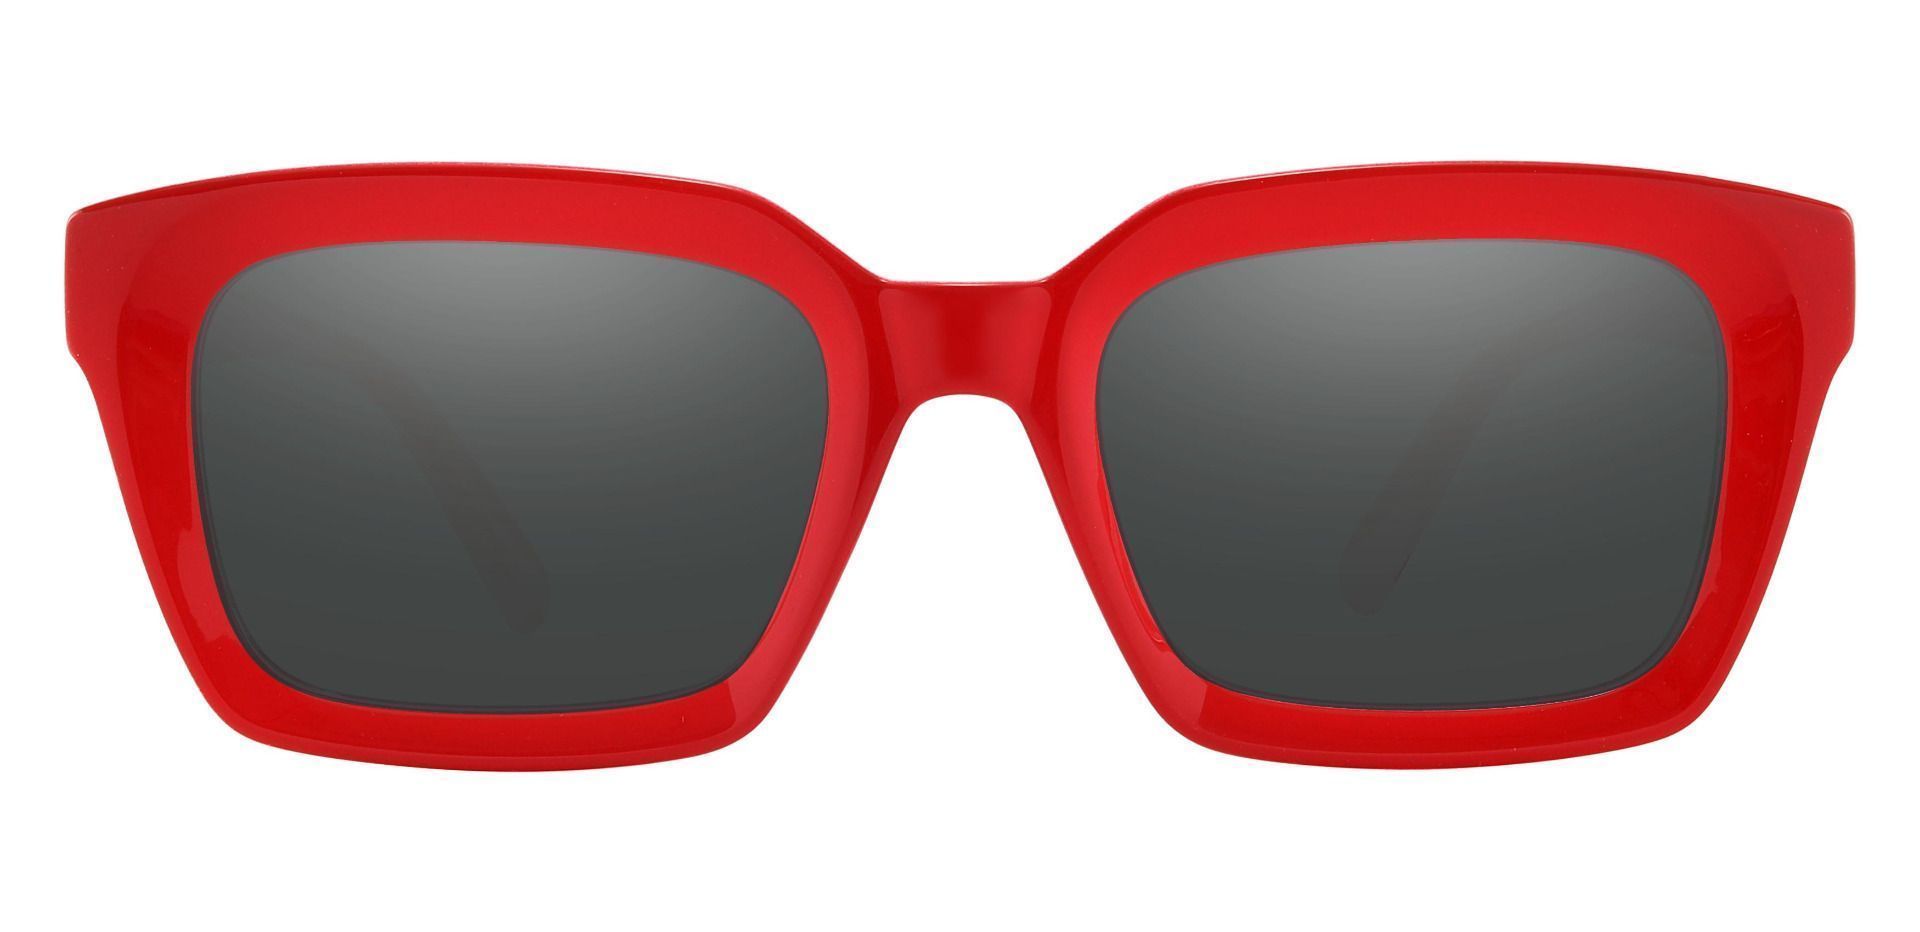 Unity Rectangle Prescription Sunglasses - Red Frame With Gray Lenses